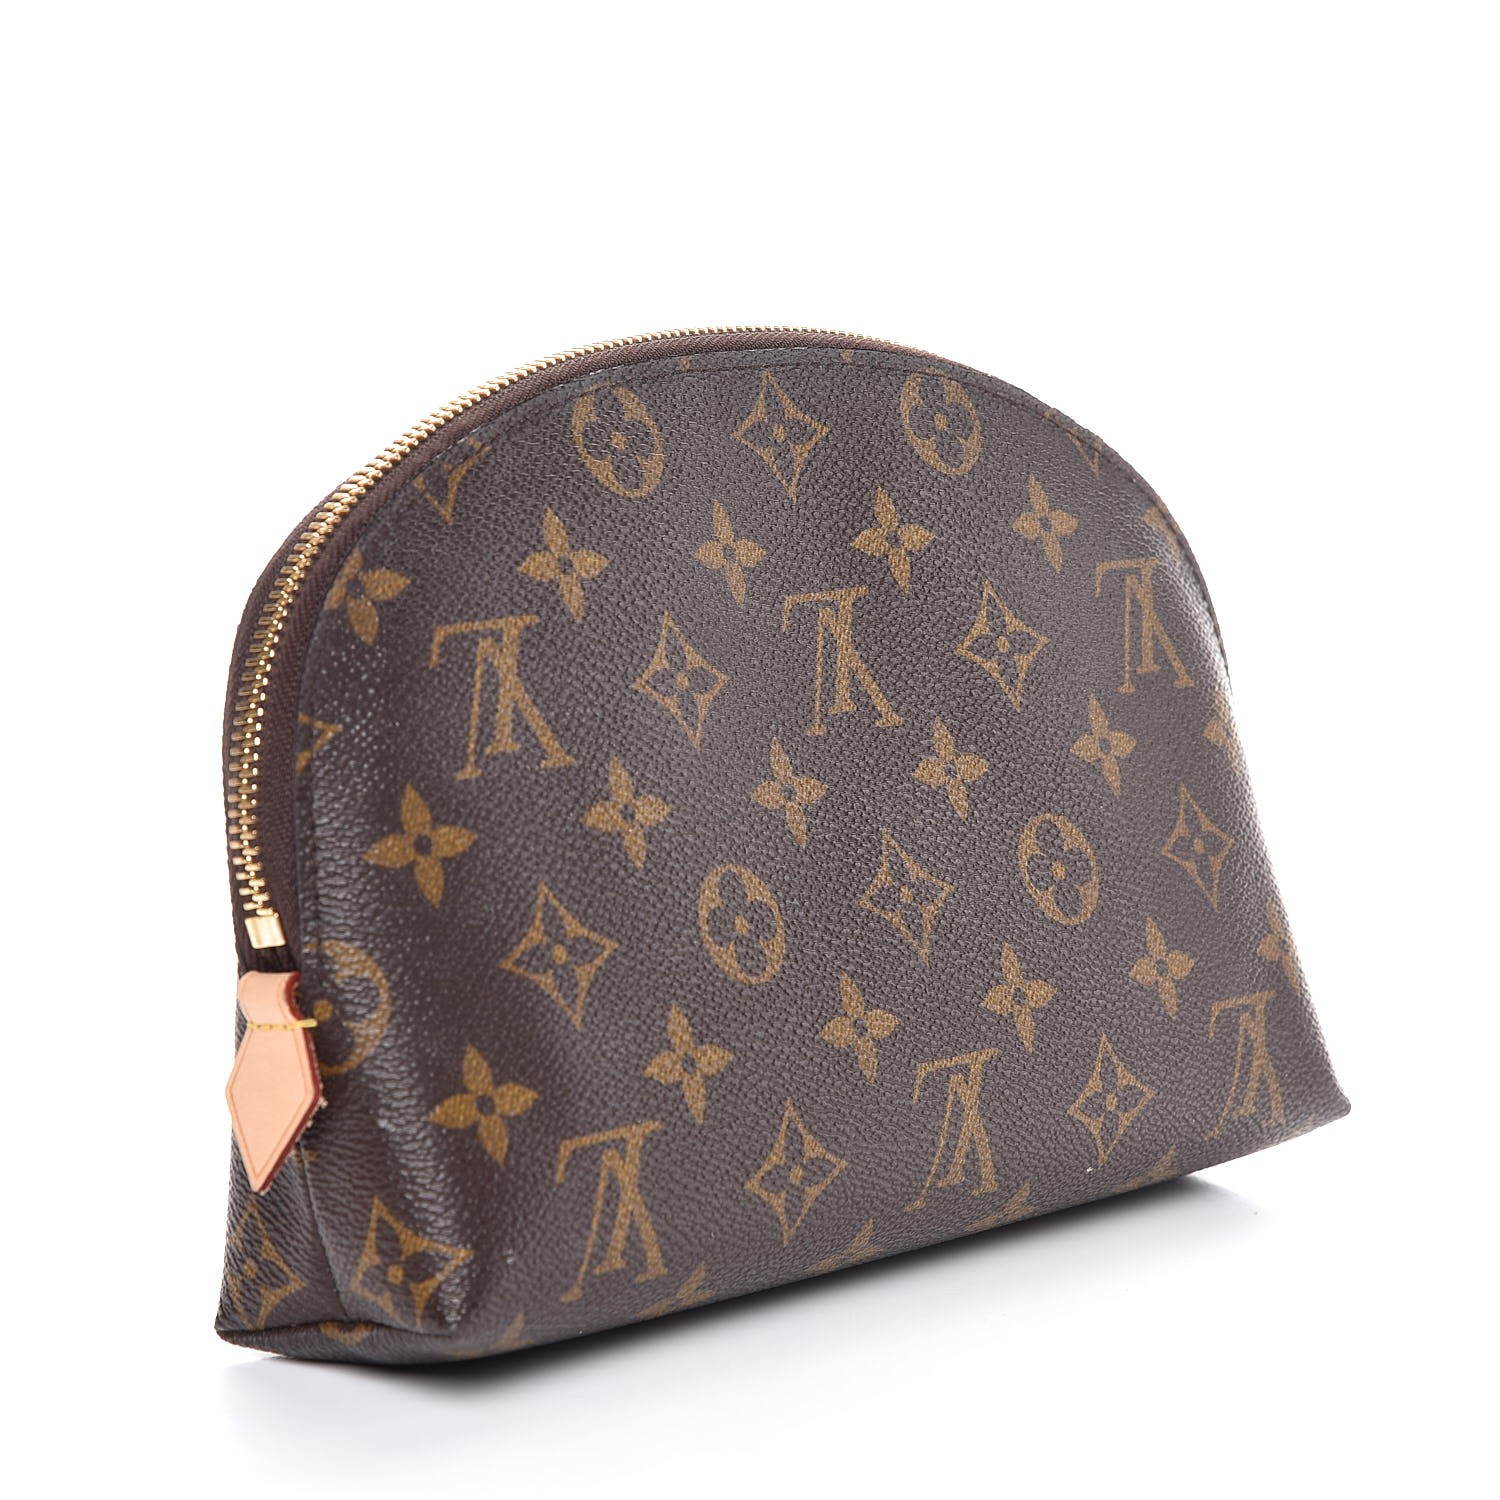 LOUIS VUITTON Monogram Canvas COSMETIC PURSE Toiletry WASH BAG at 1stDibs